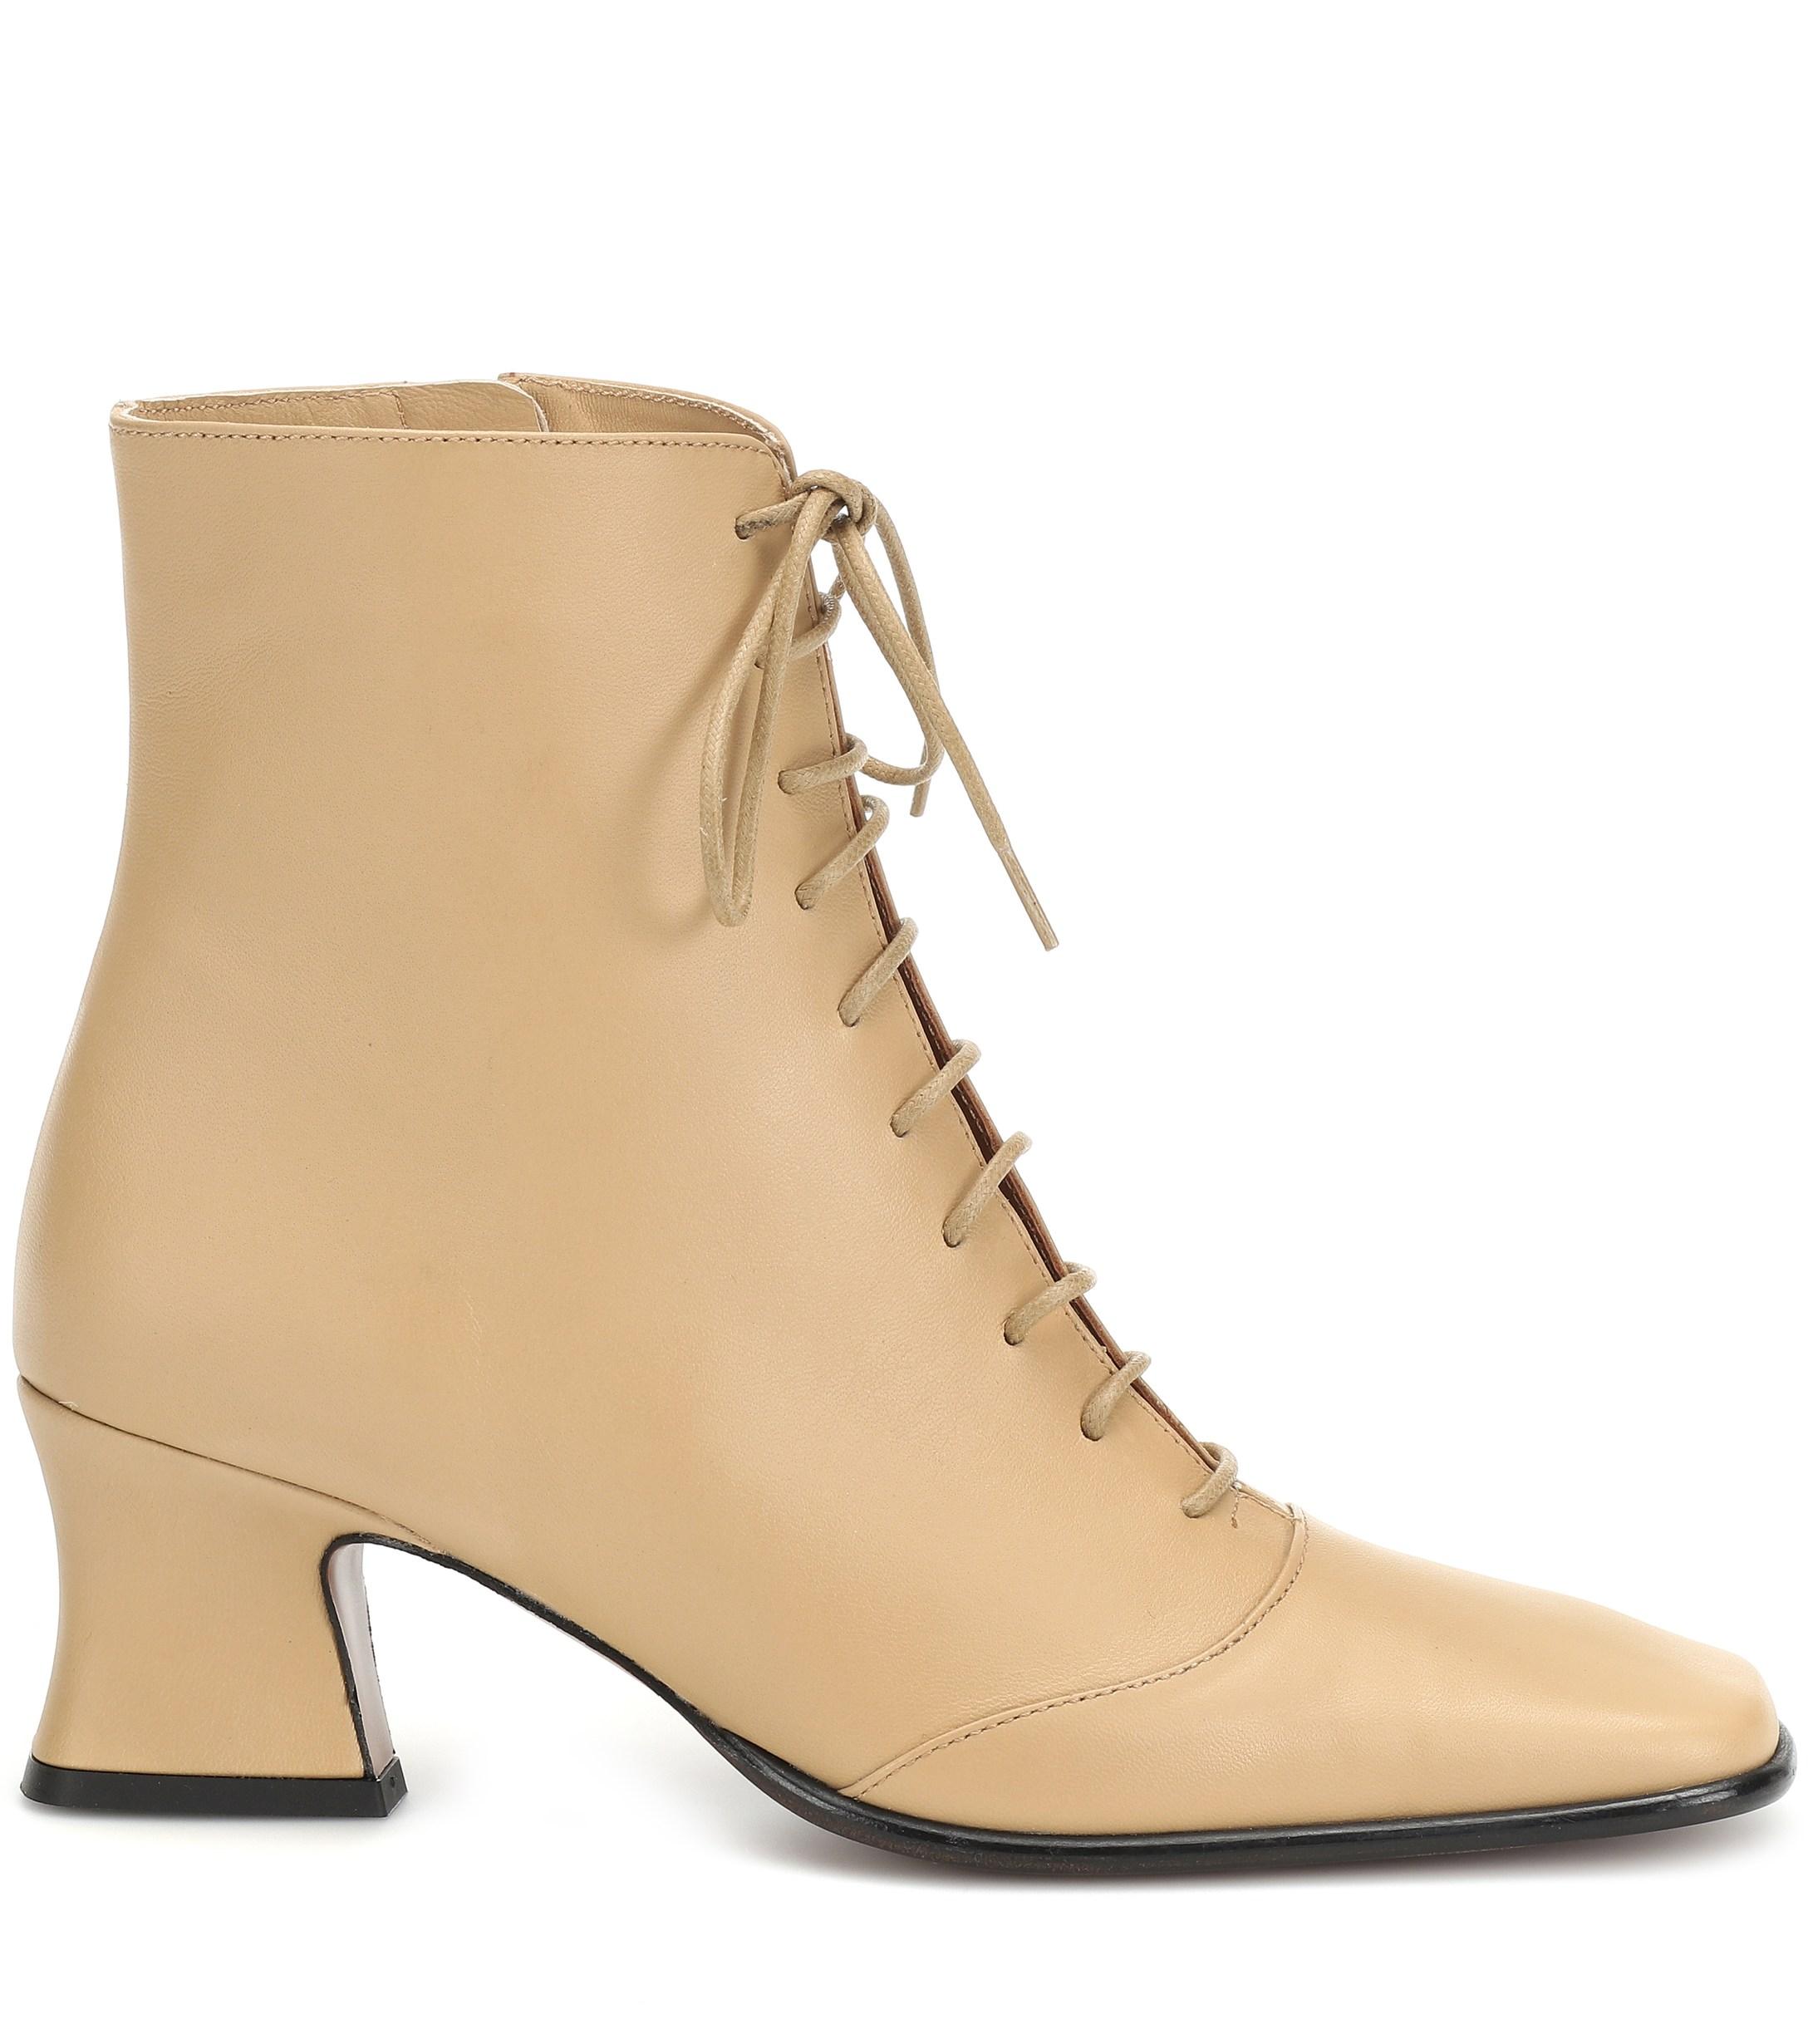 BY FAR Kate Leather Ankle Boots in Cream (Natural) - Lyst